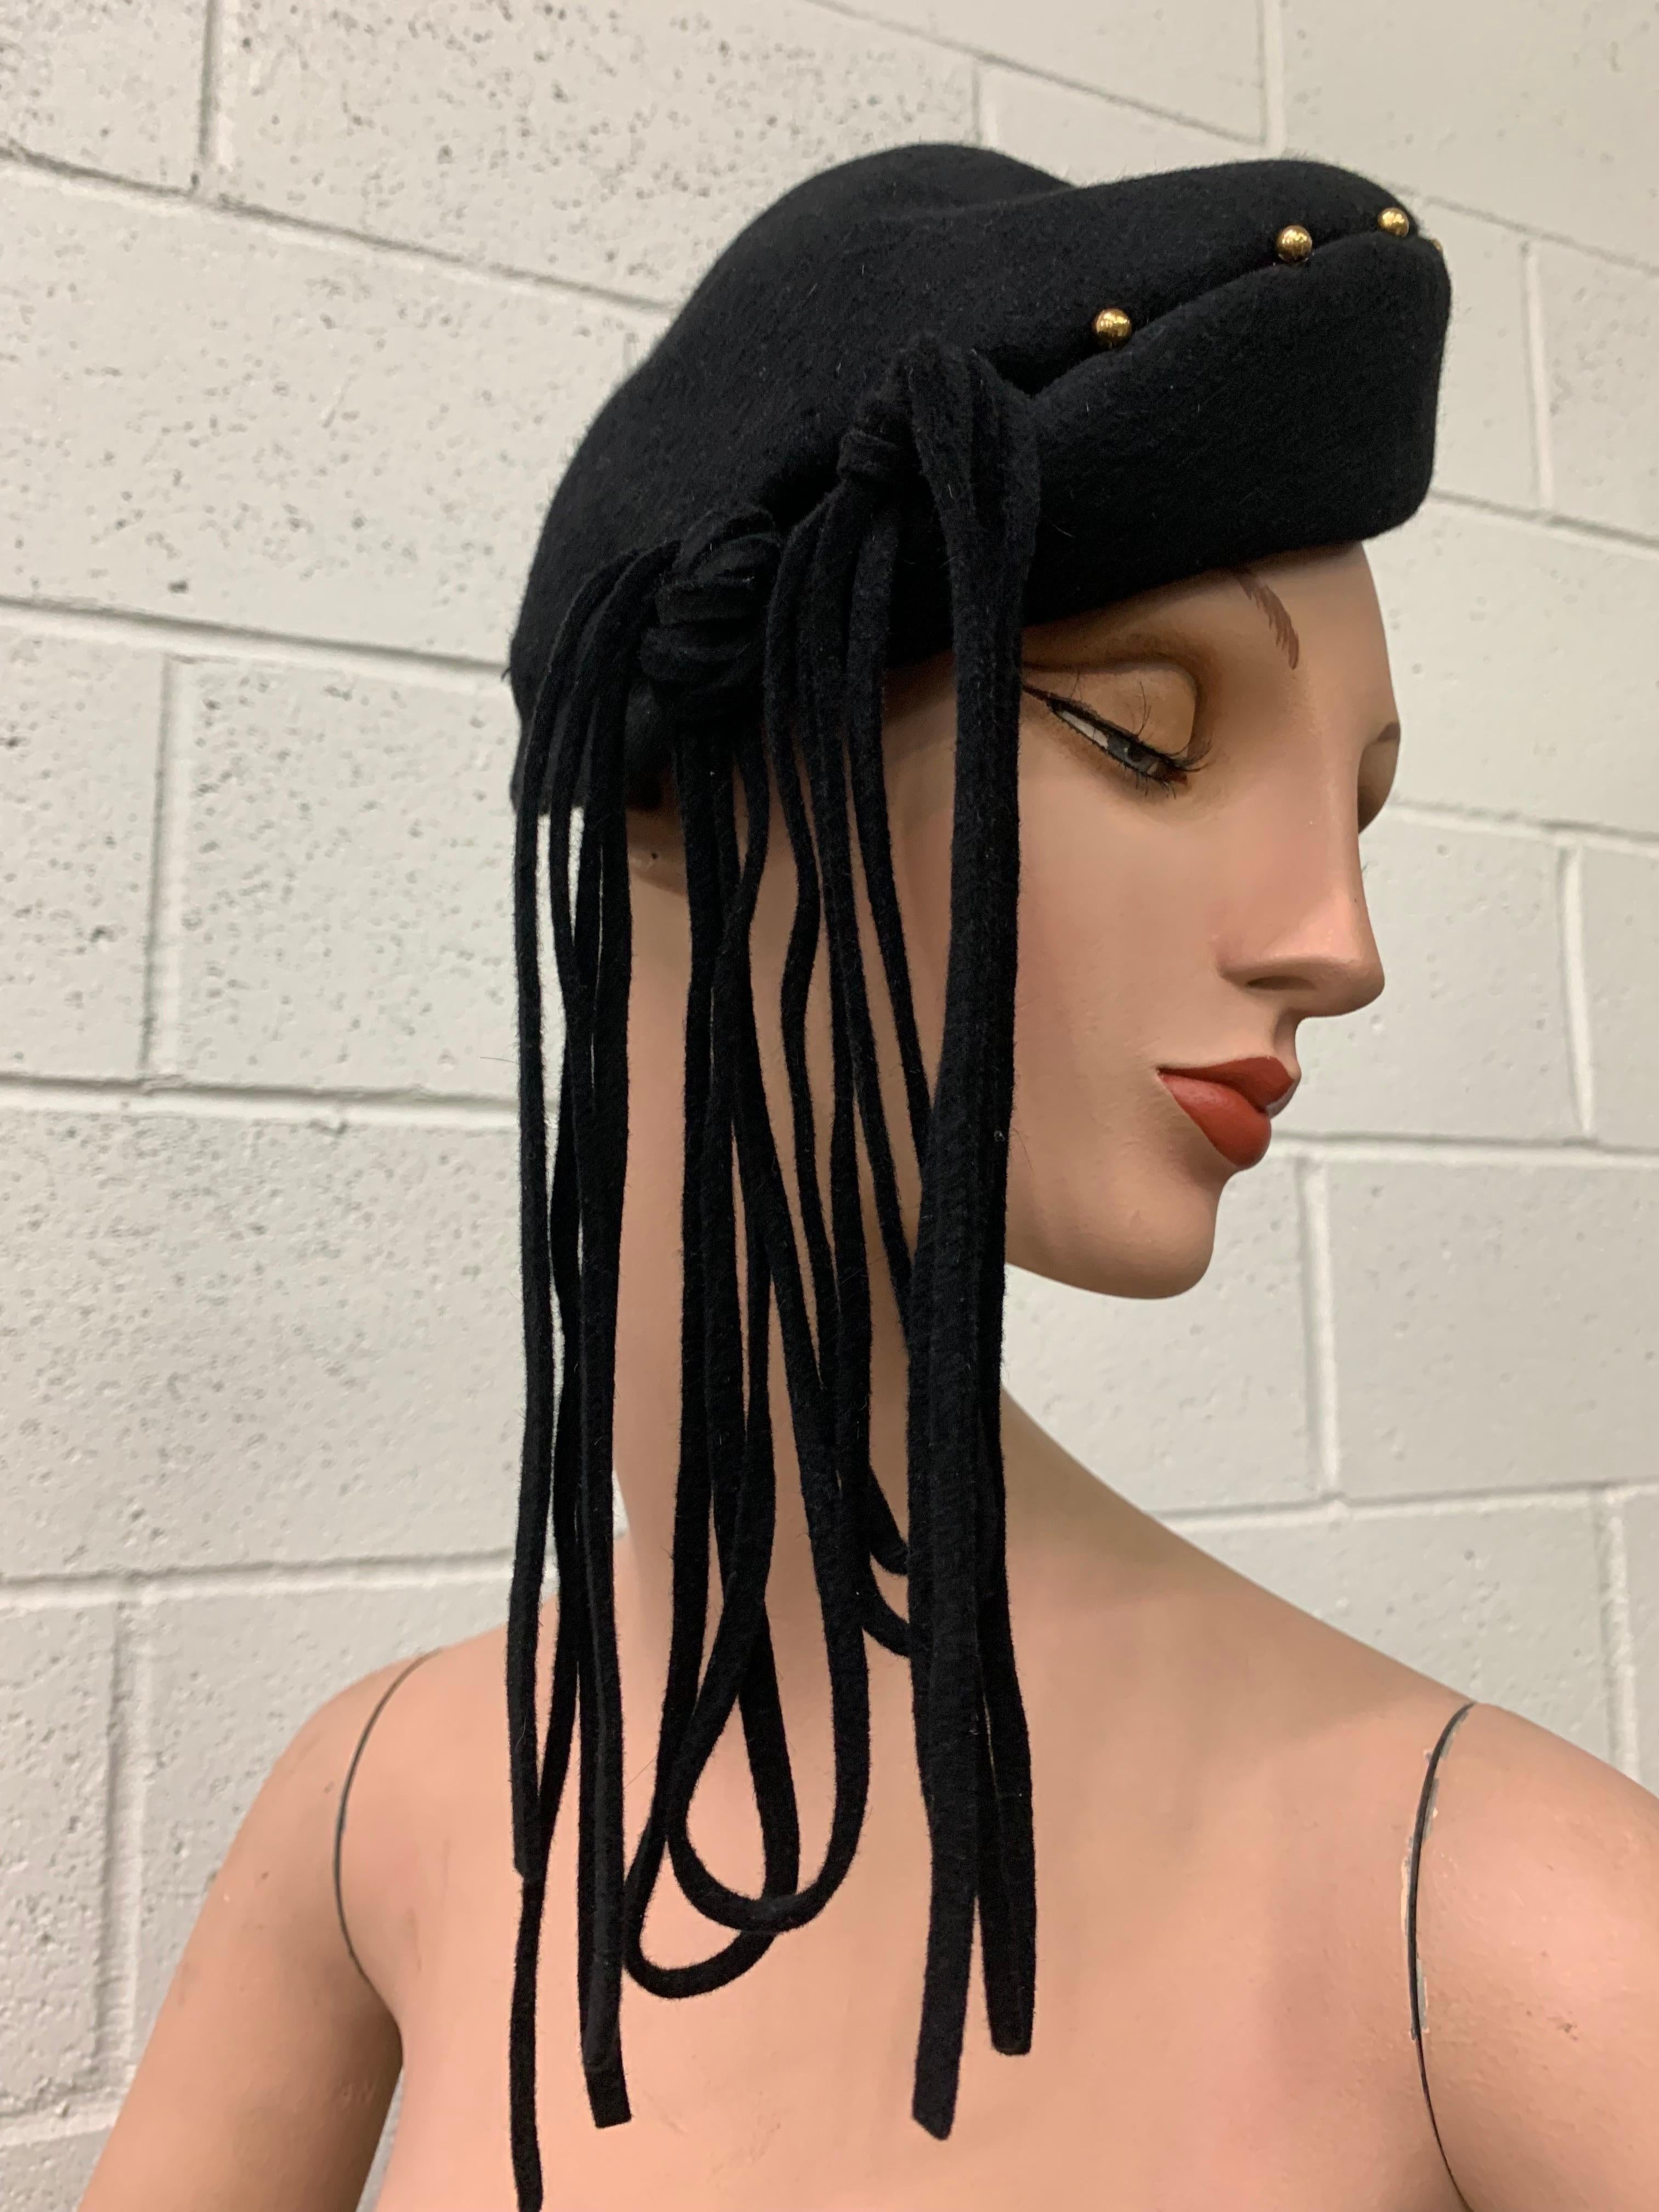 1940s Black Wool Felt Beret w Rolled Brim Gold Studs & Long Felt Knotted Fringe at Side: Unmarked as to maker, this one is high on style!  Size Medium-Large